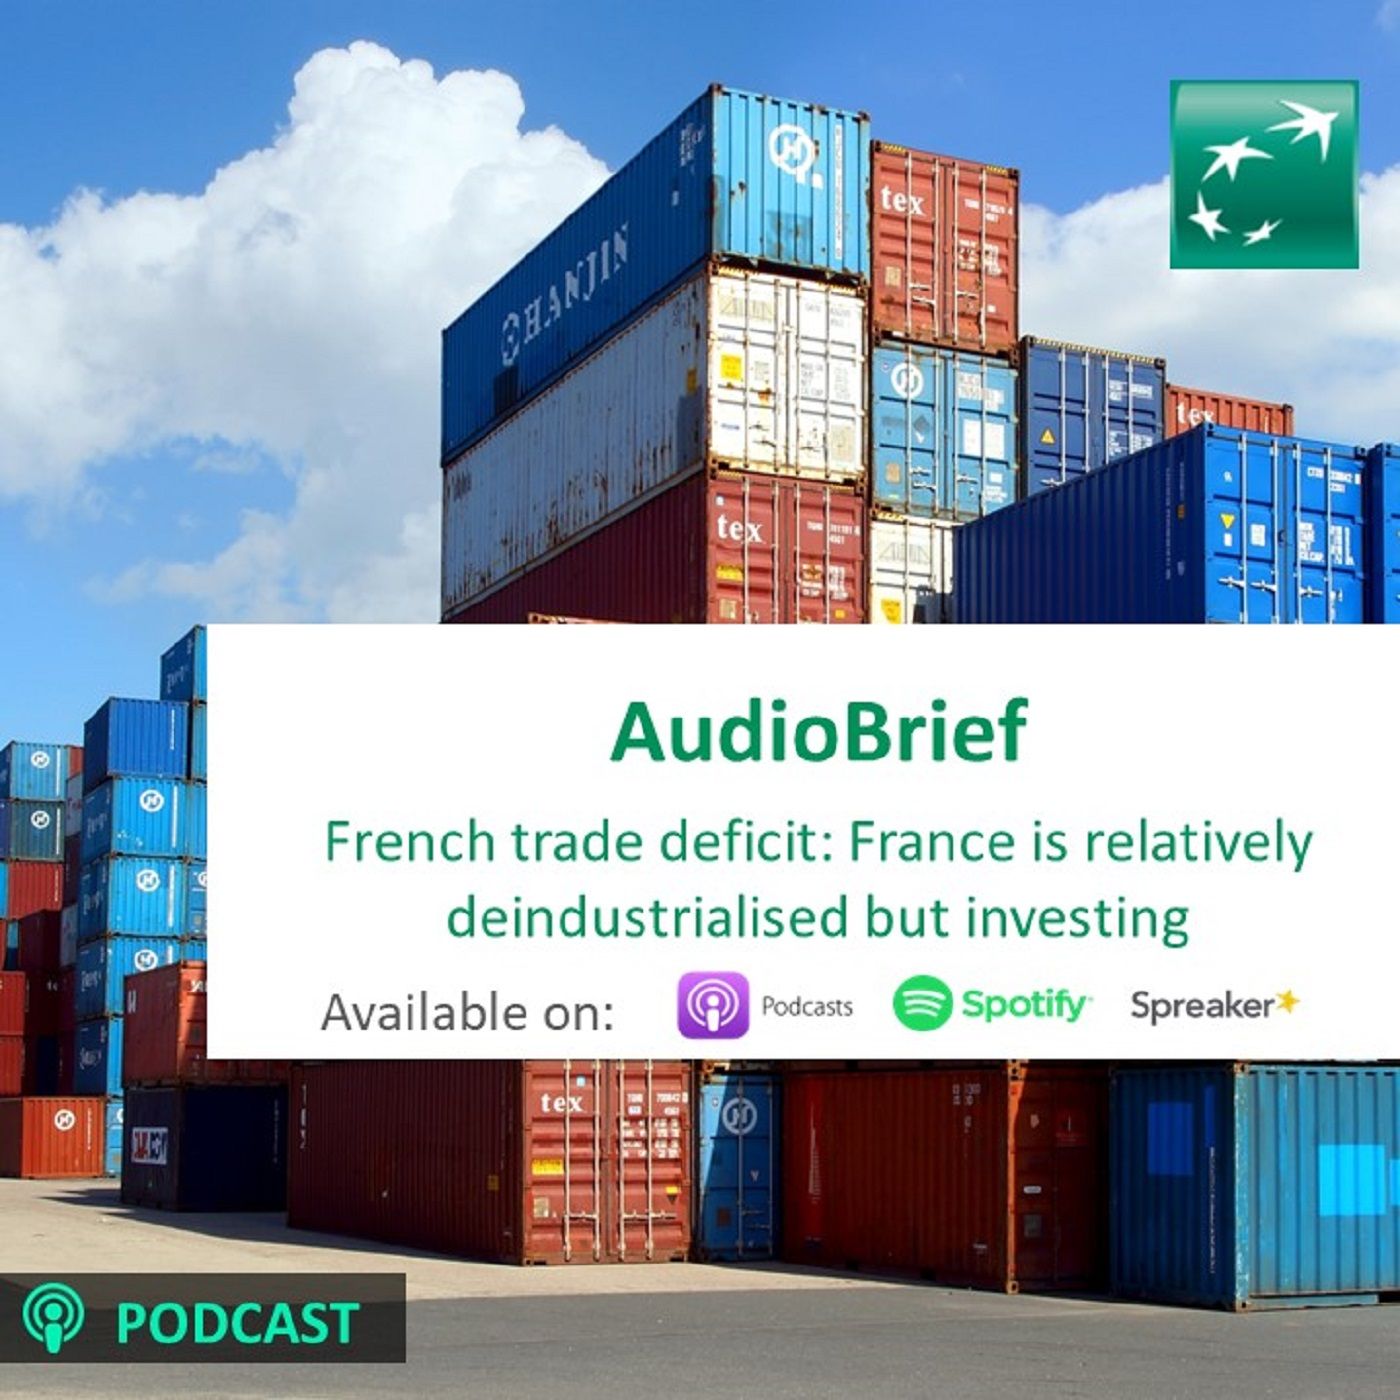 French trade deficit: France is relatively deindustrialised but investing